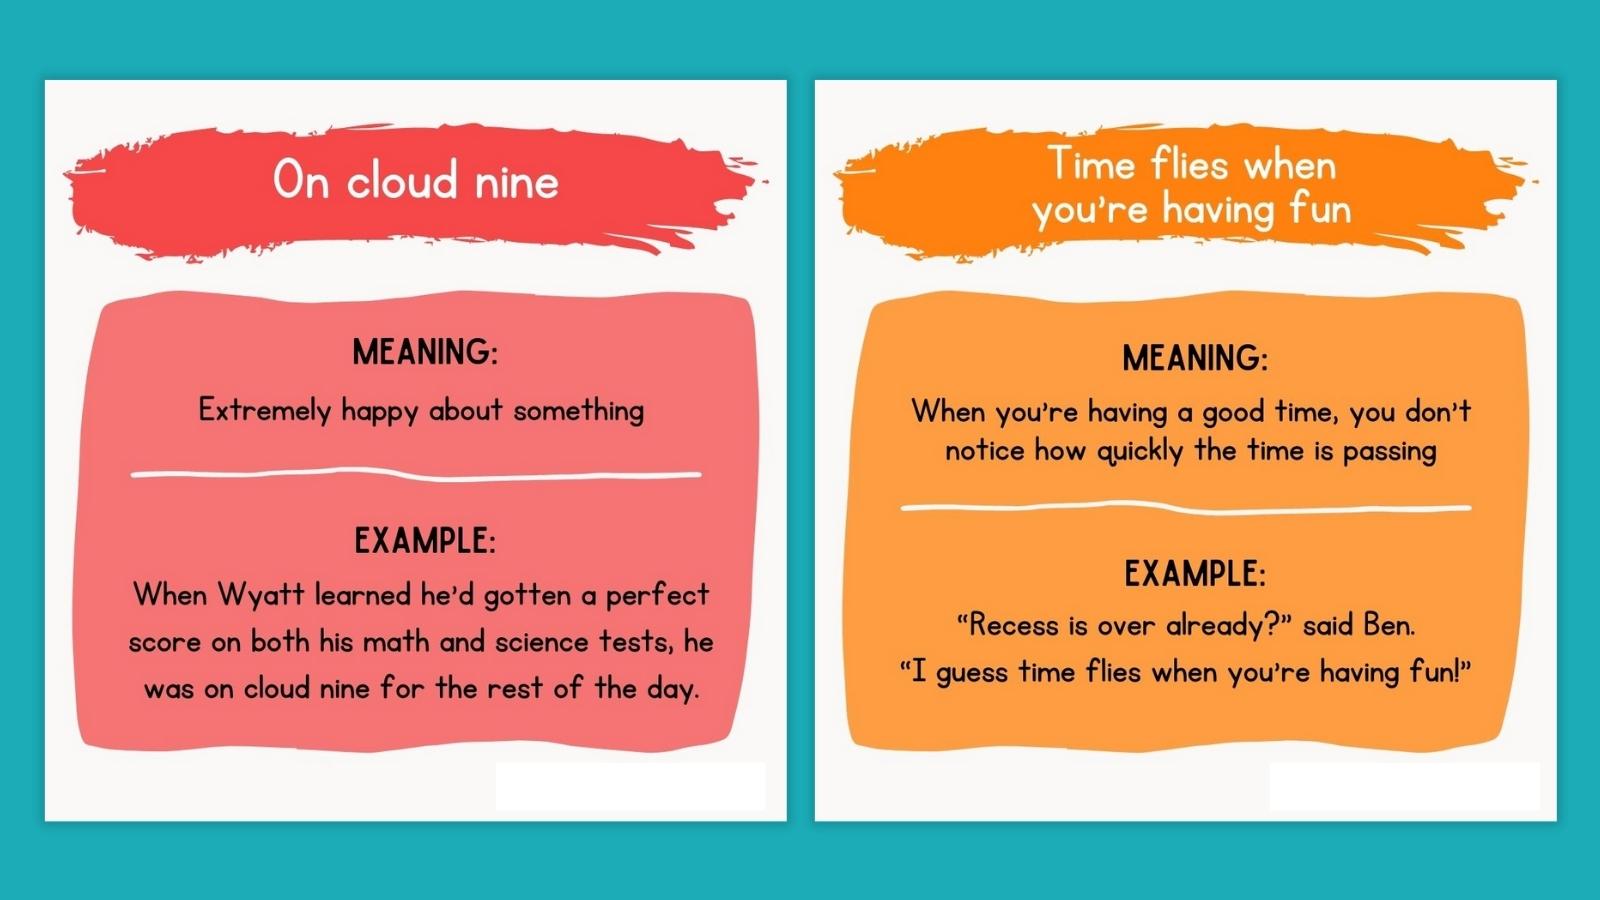 Every Cloud Has a Silver Lining: Idiom Meaning & Examples - Movie